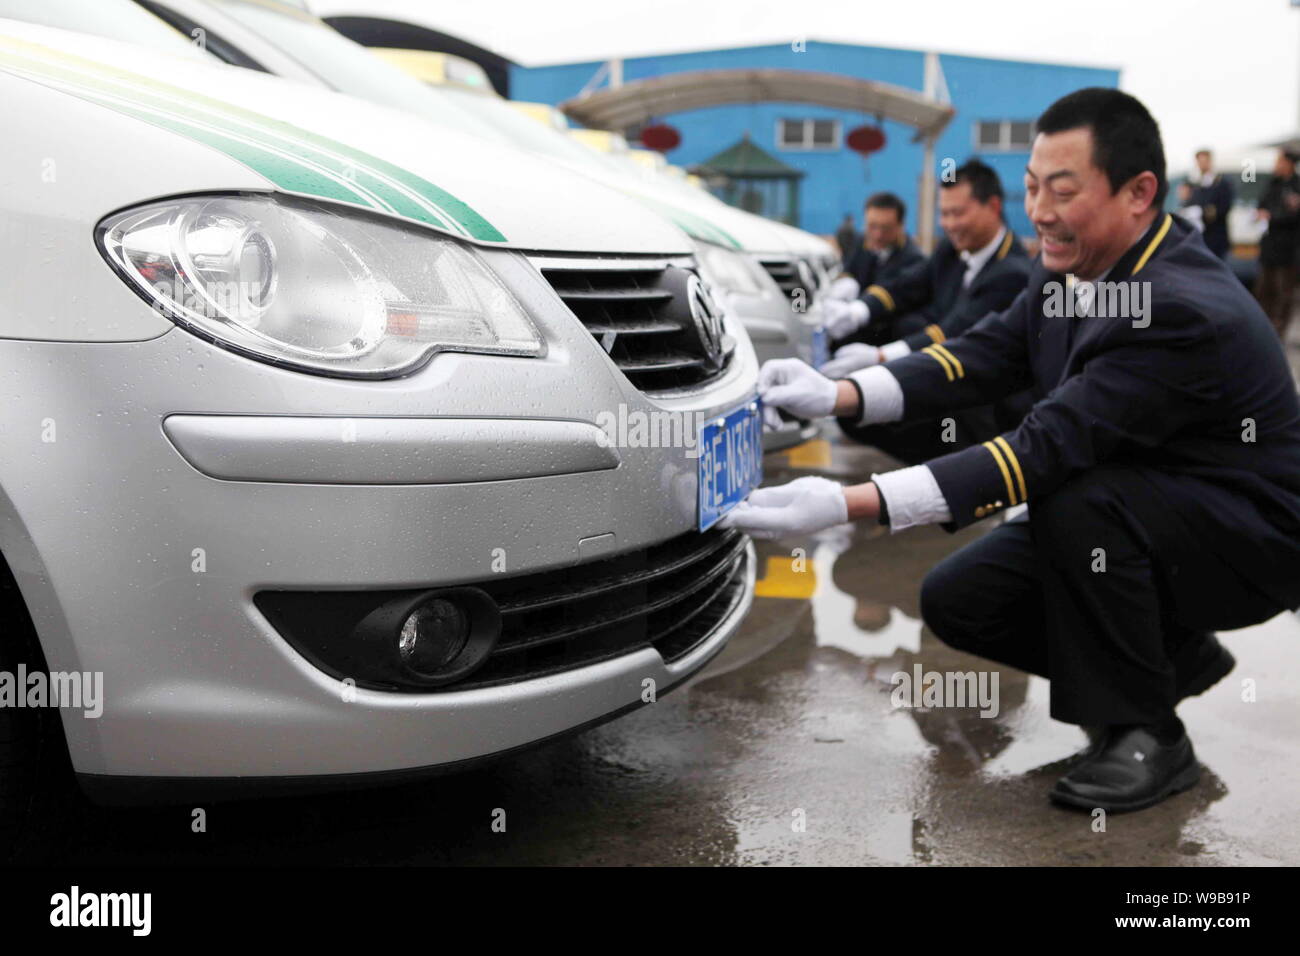 Chinese taxi drivers put license plates on the Volkswagen Touran taxis for the Expo 2010 at a parking lot in Shanghai, China, 24 March 2010.   Shangha Stock Photo